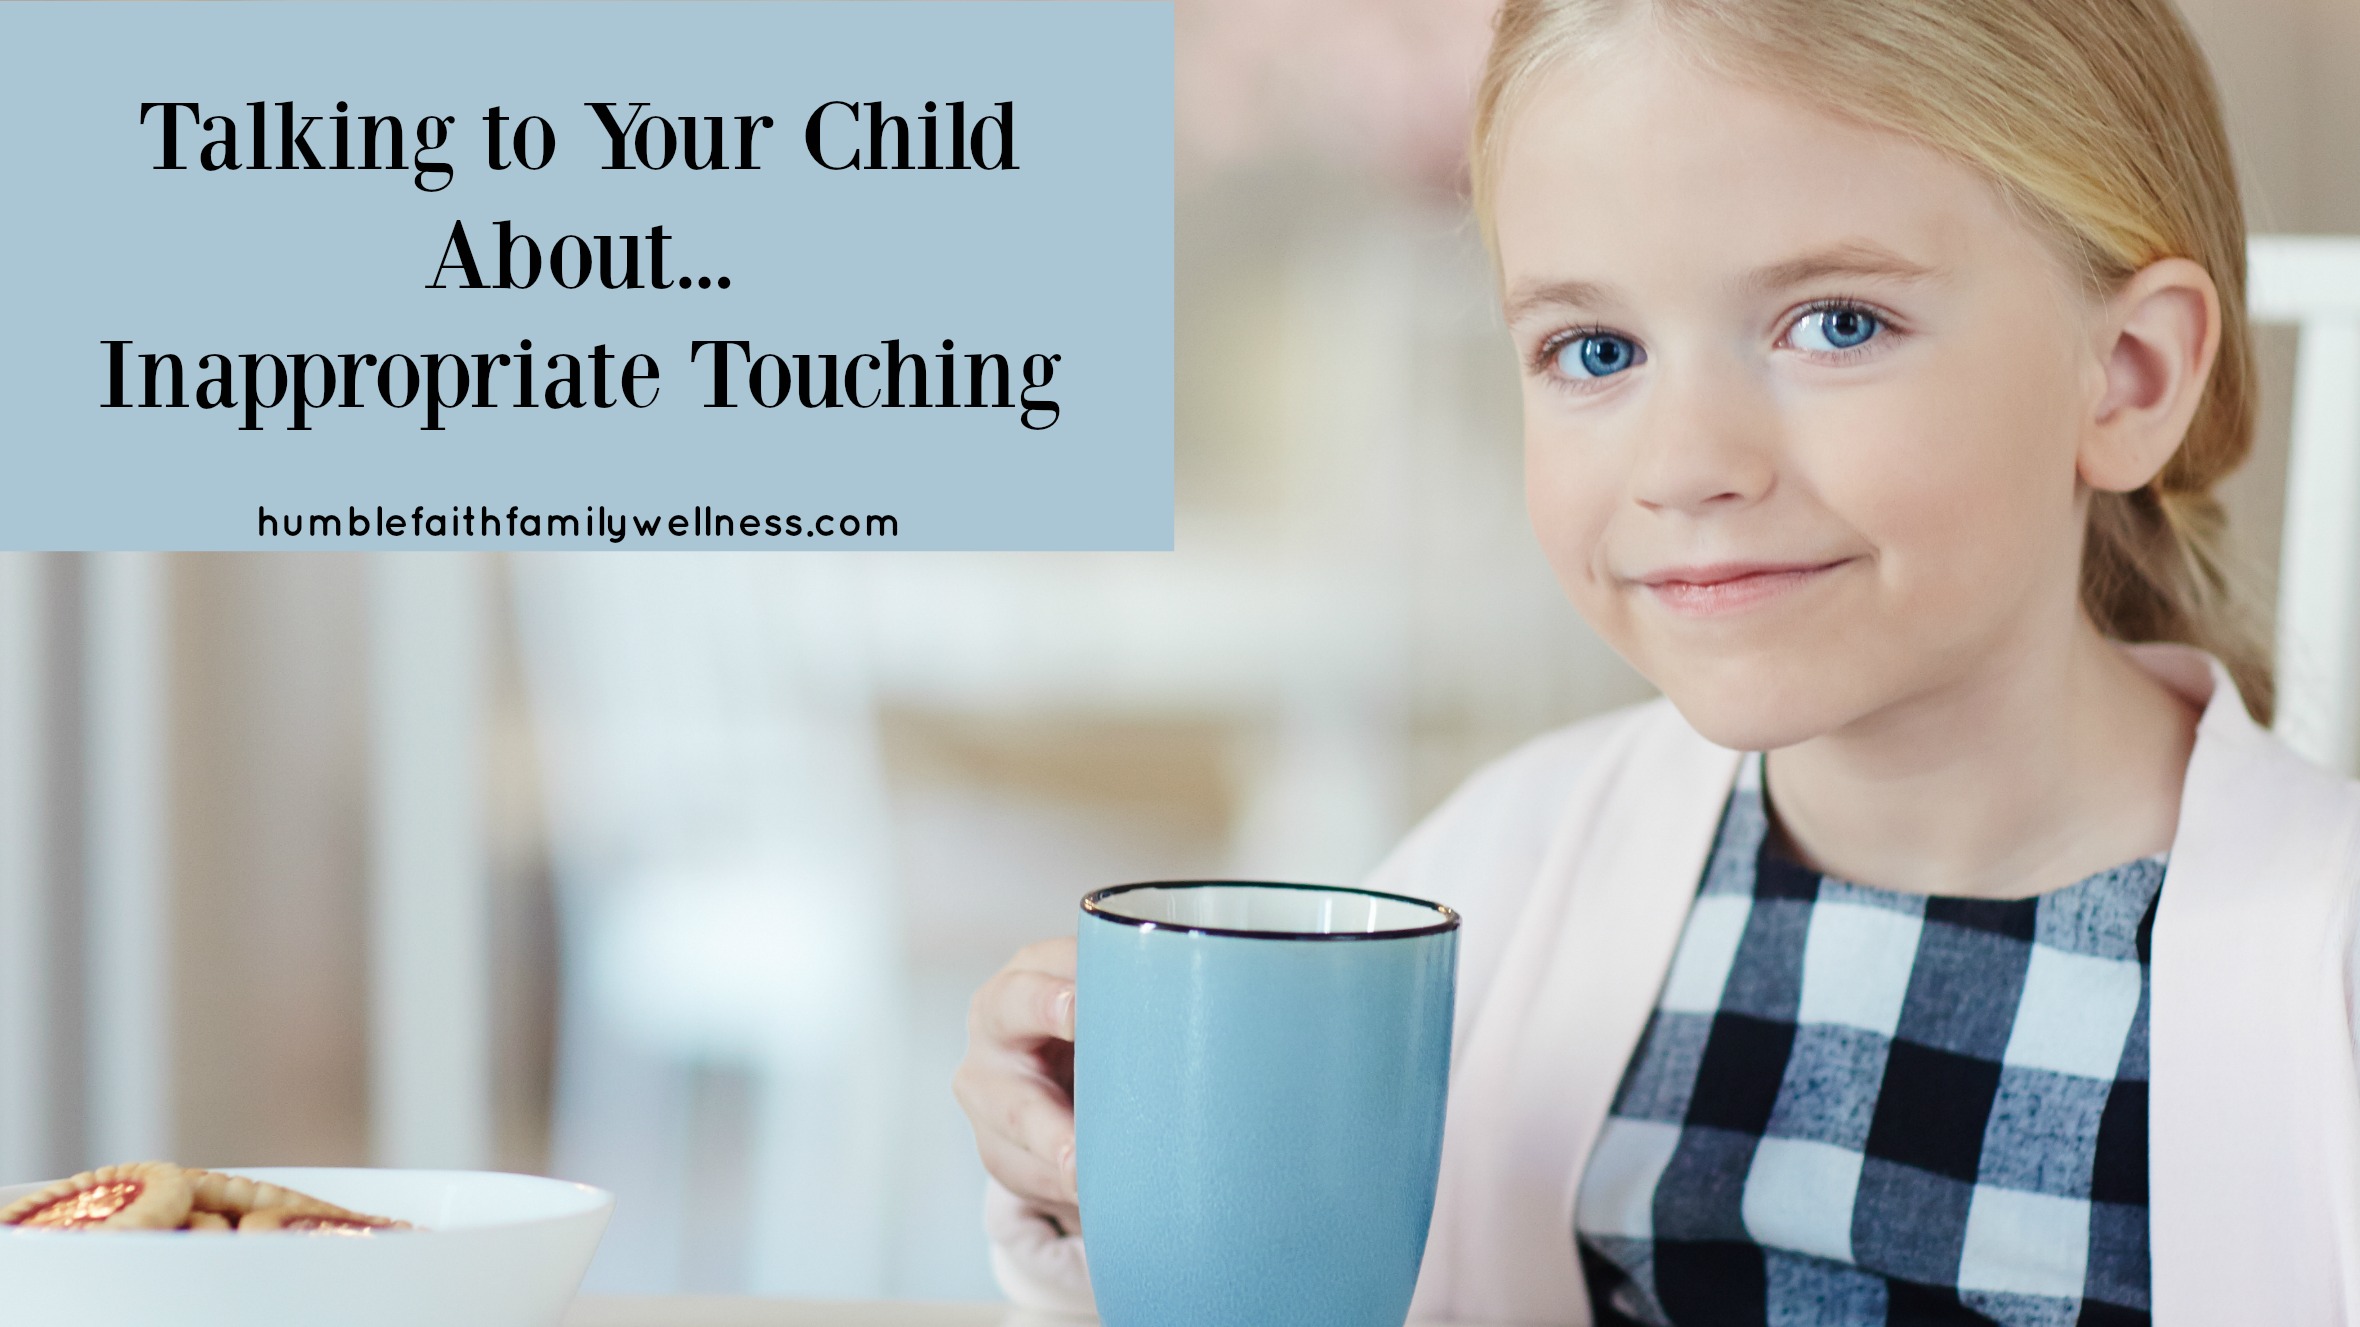 Addressing the tough stuff: Talking to your child about inappropriate touching